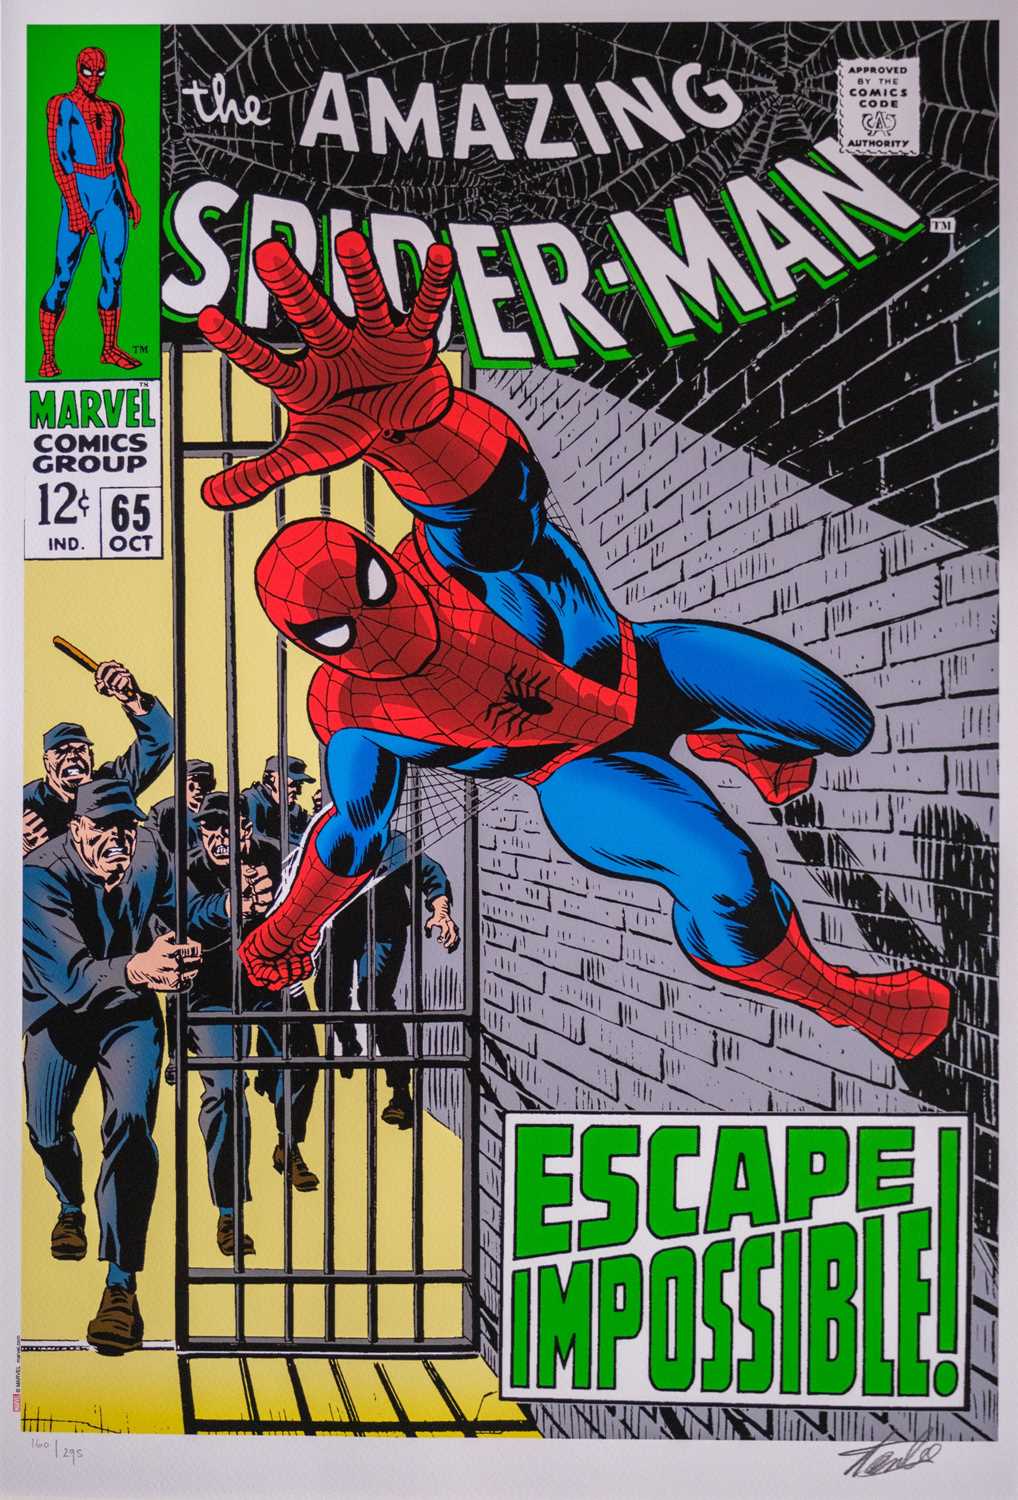 (Signed) Stan LEE (1922-2018) The Amazing Spider-Man #65 - Escape Impossible!